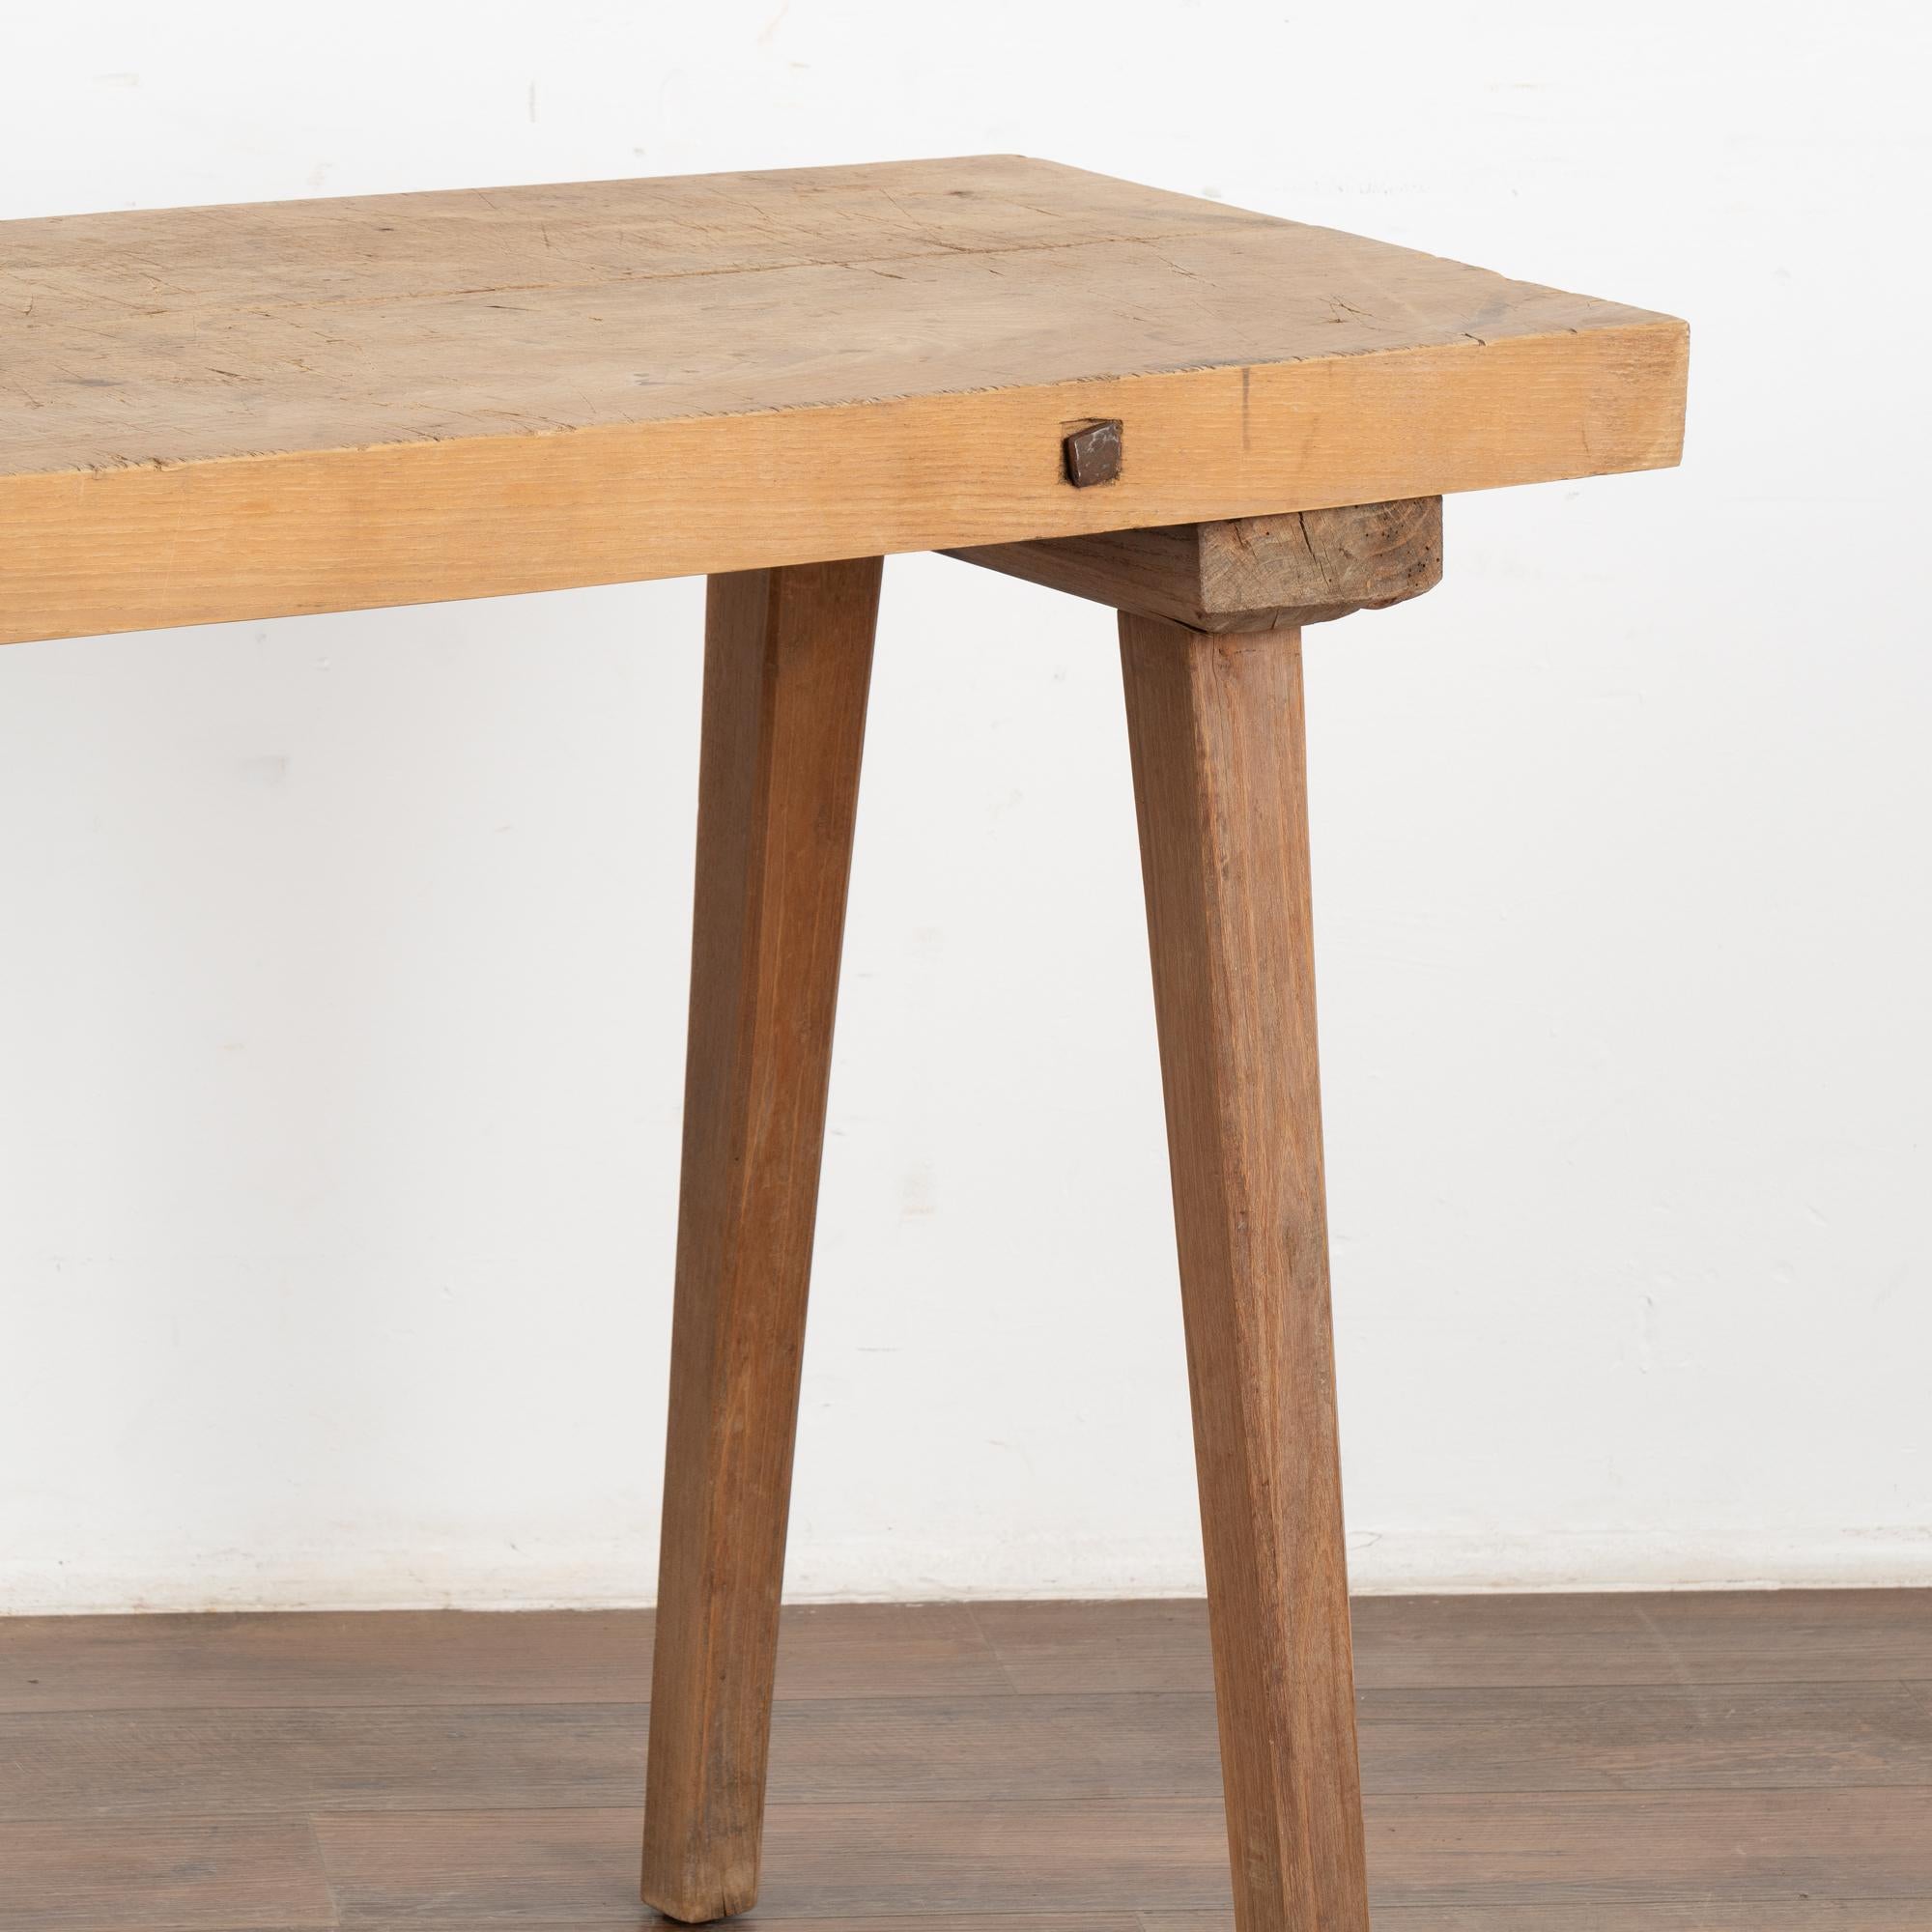 Wood Rustic Peg Leg Console Table from Hungary, circa 1890 For Sale